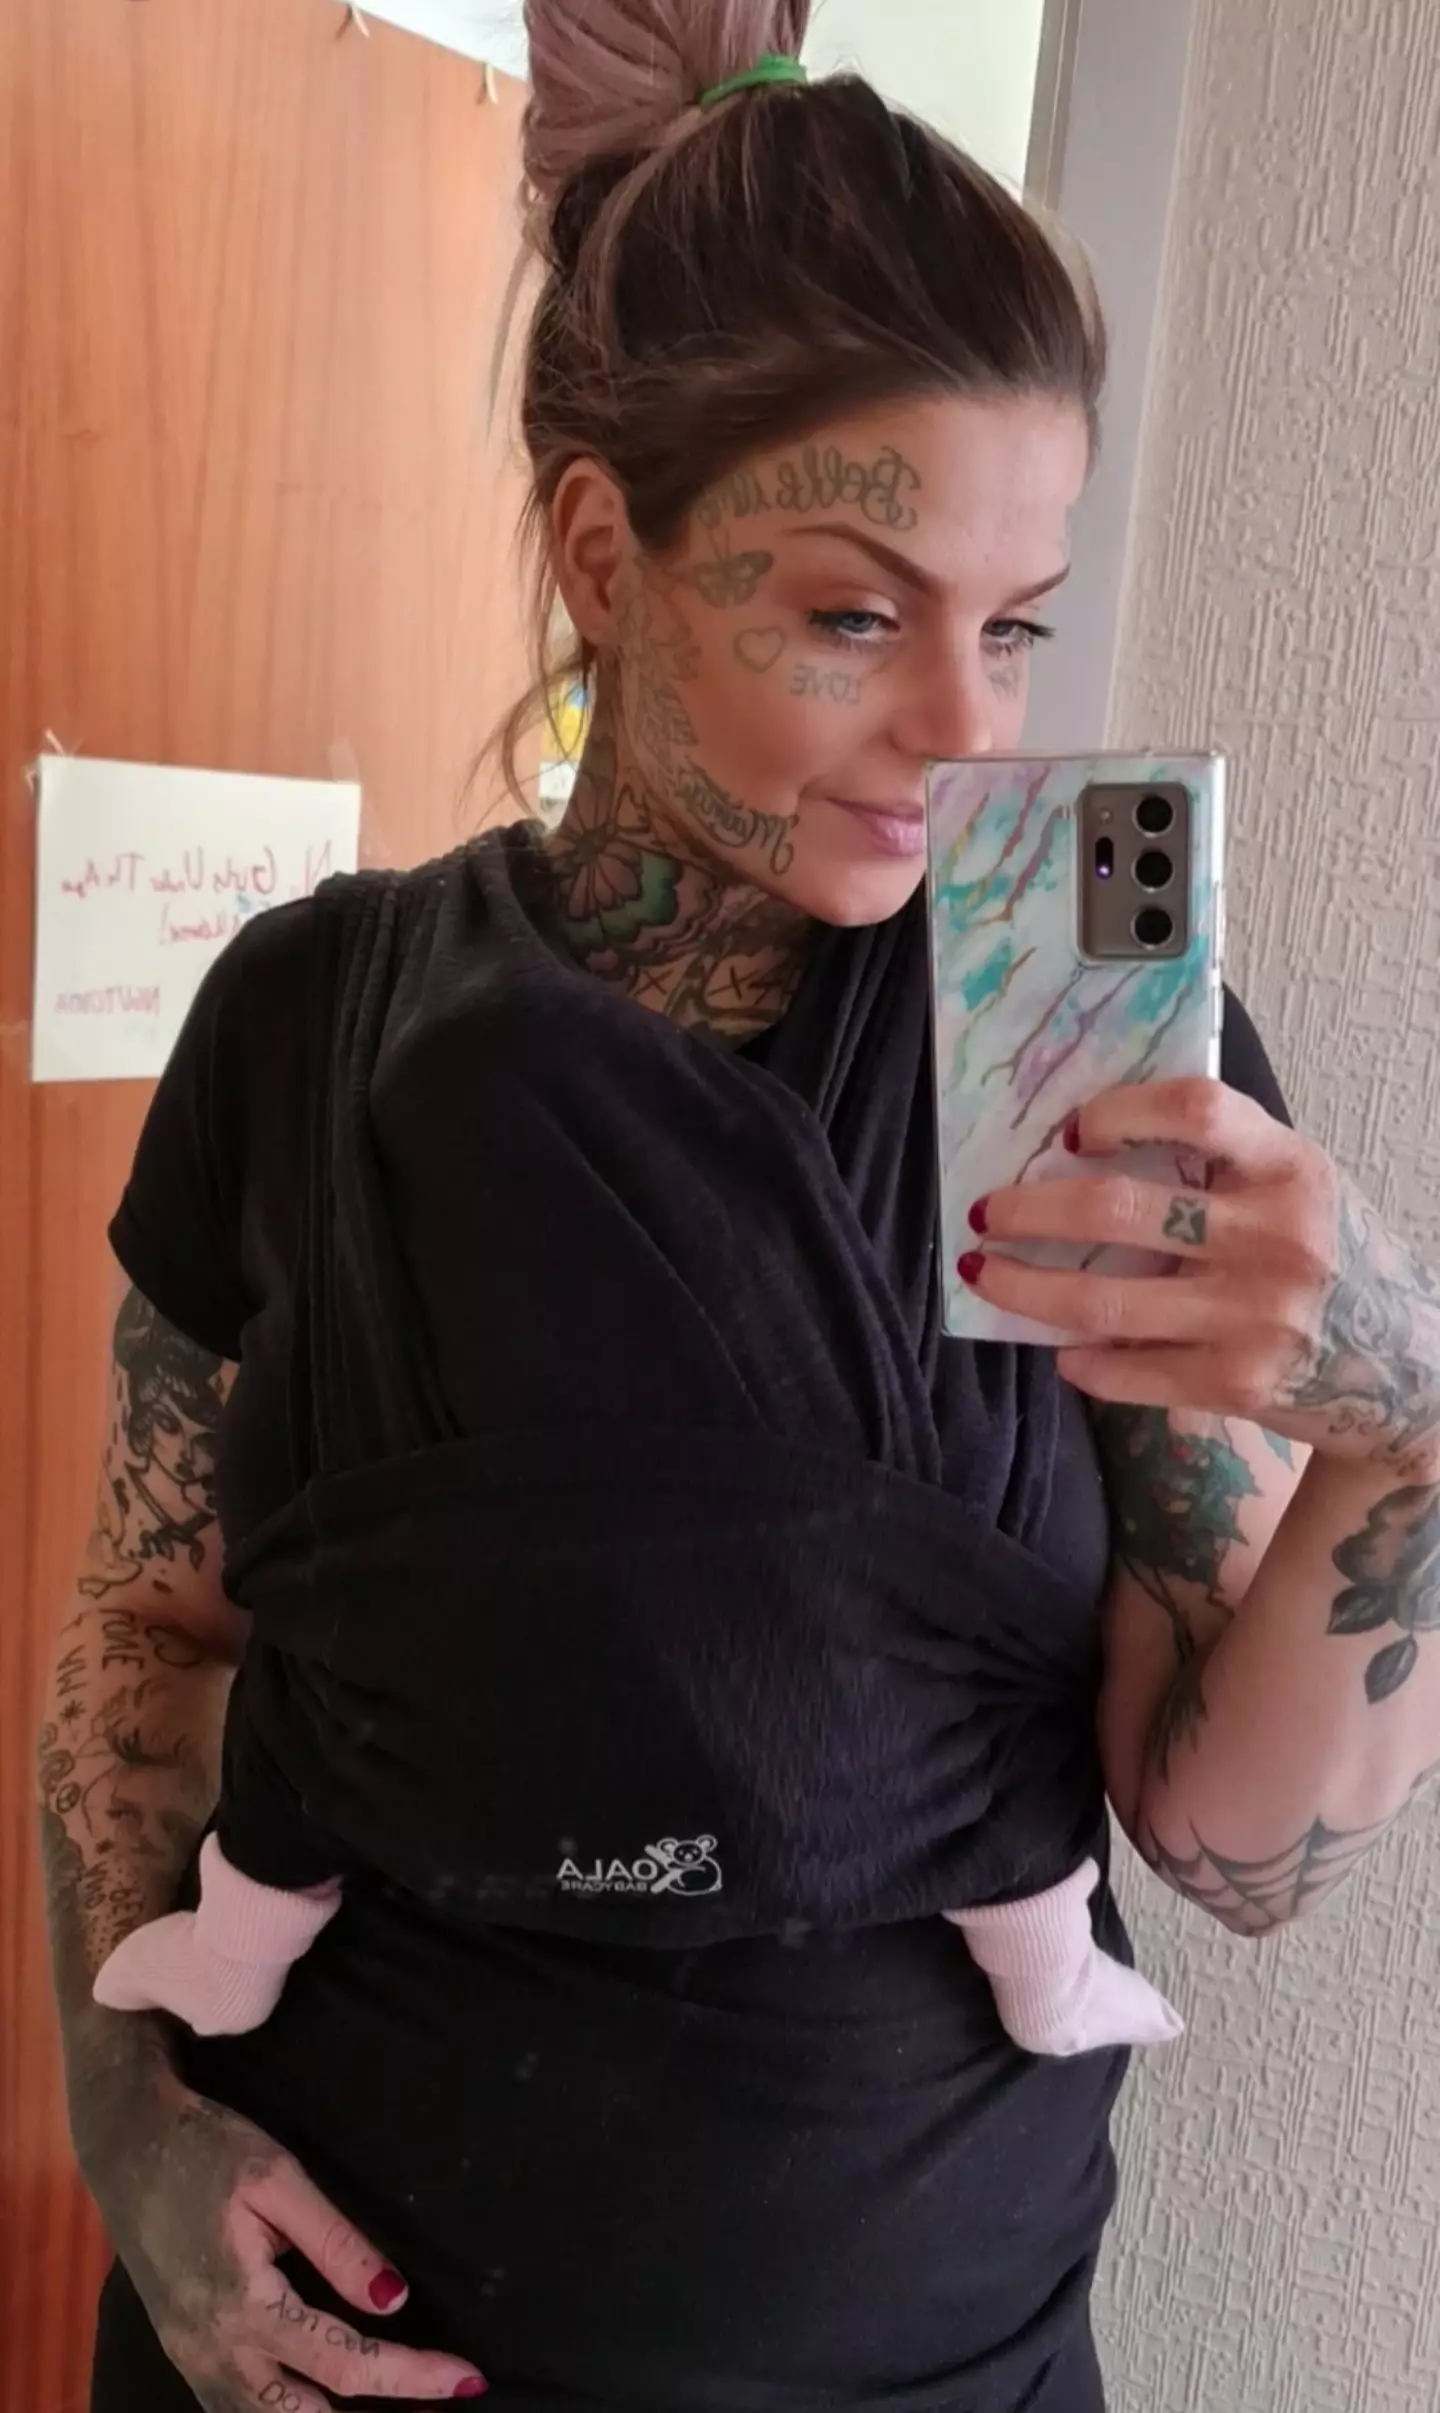 Claire says people are 'quick to judge' her facial tattoos.